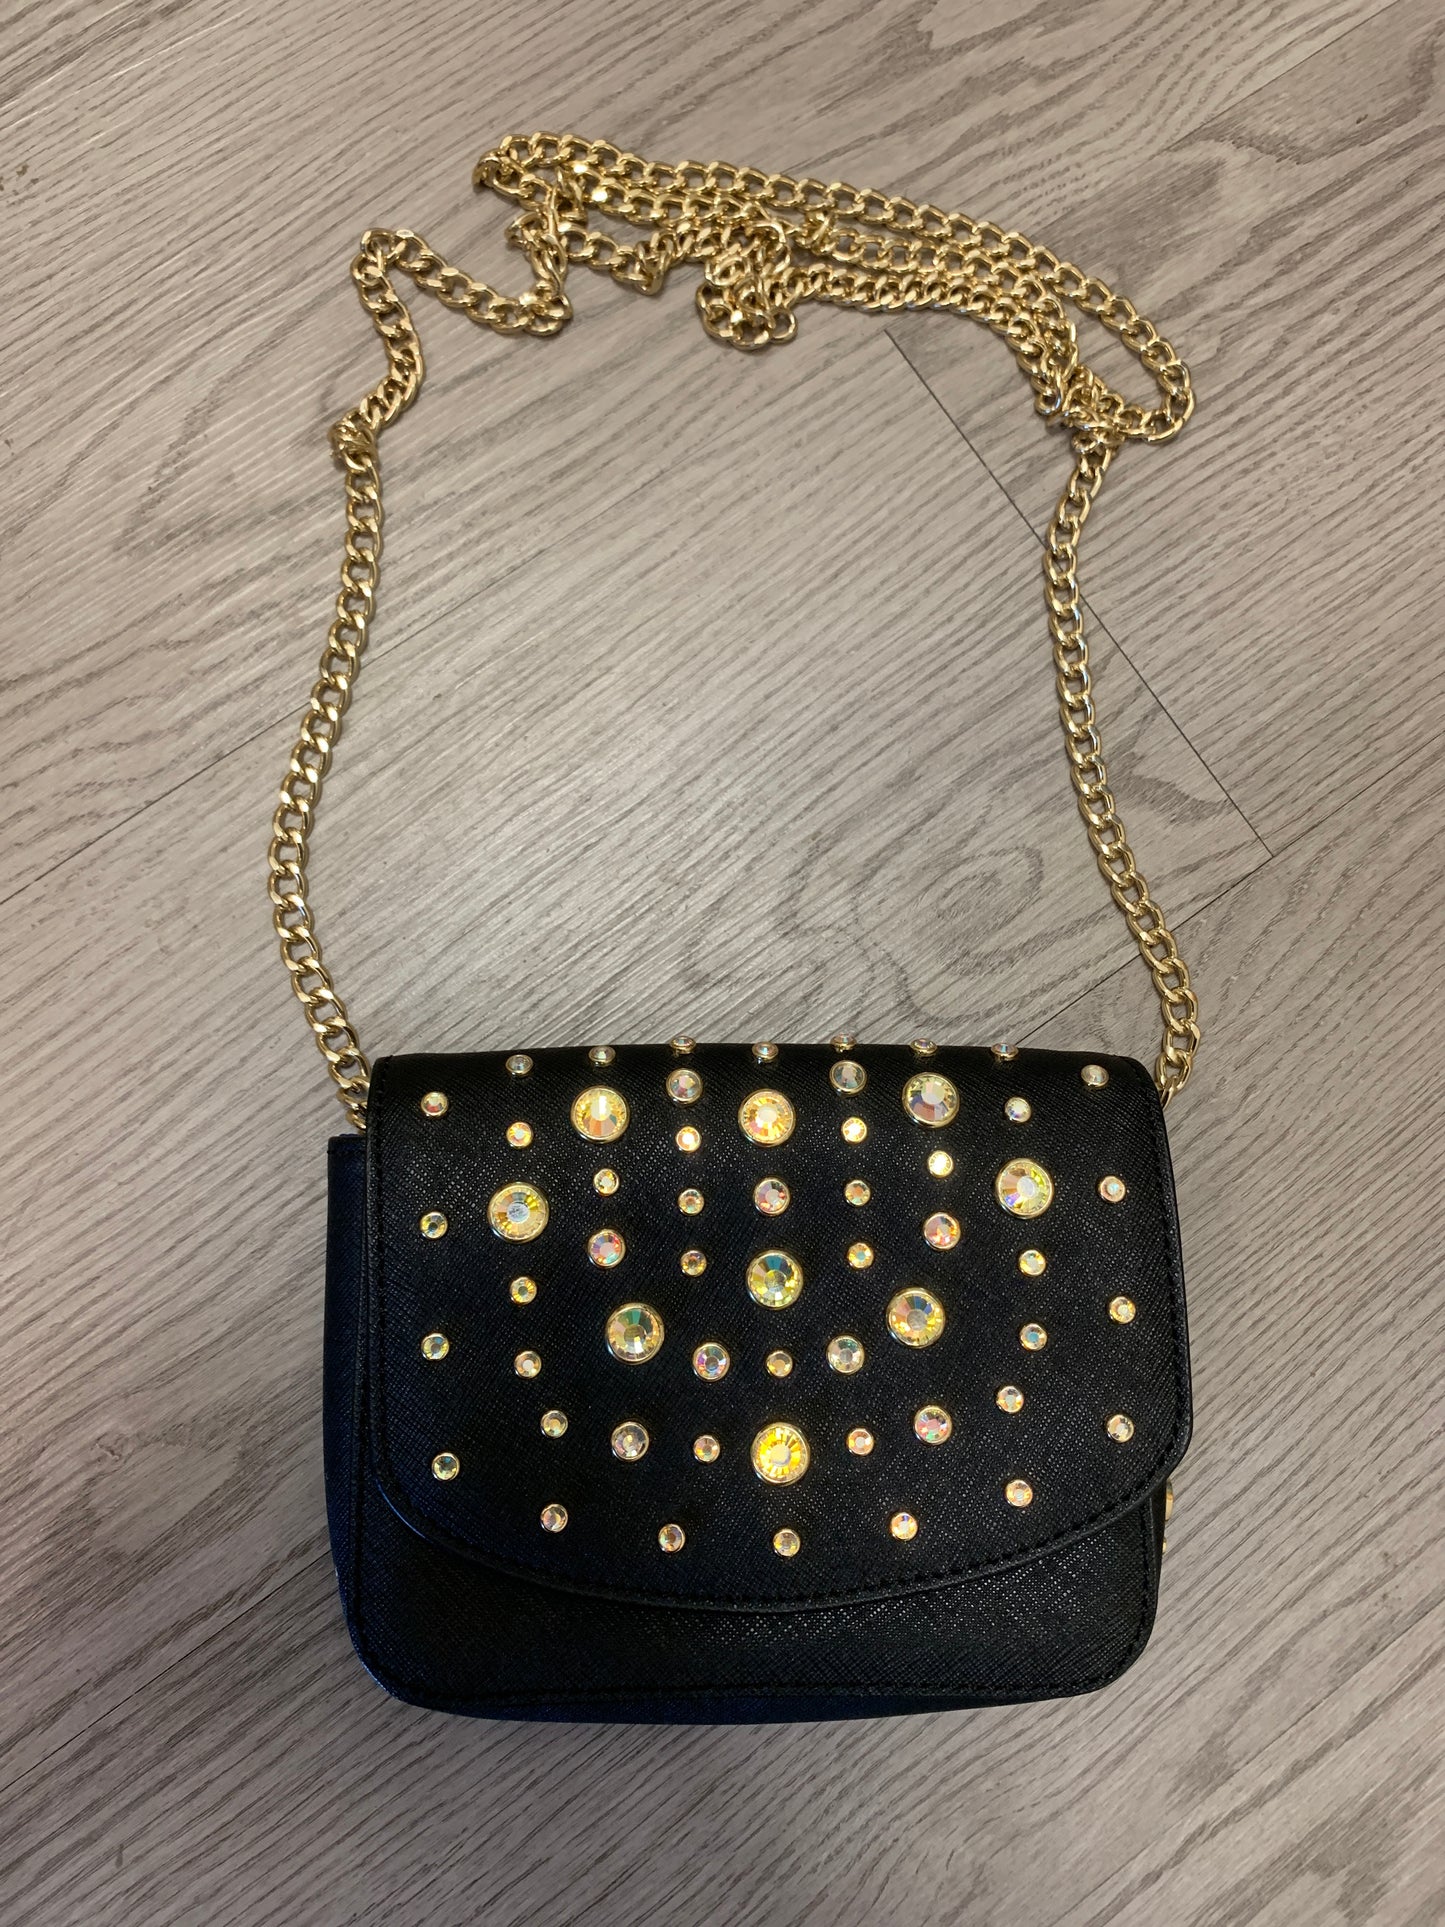 Juicy Couture Leather Crossbody With Jewel Accents